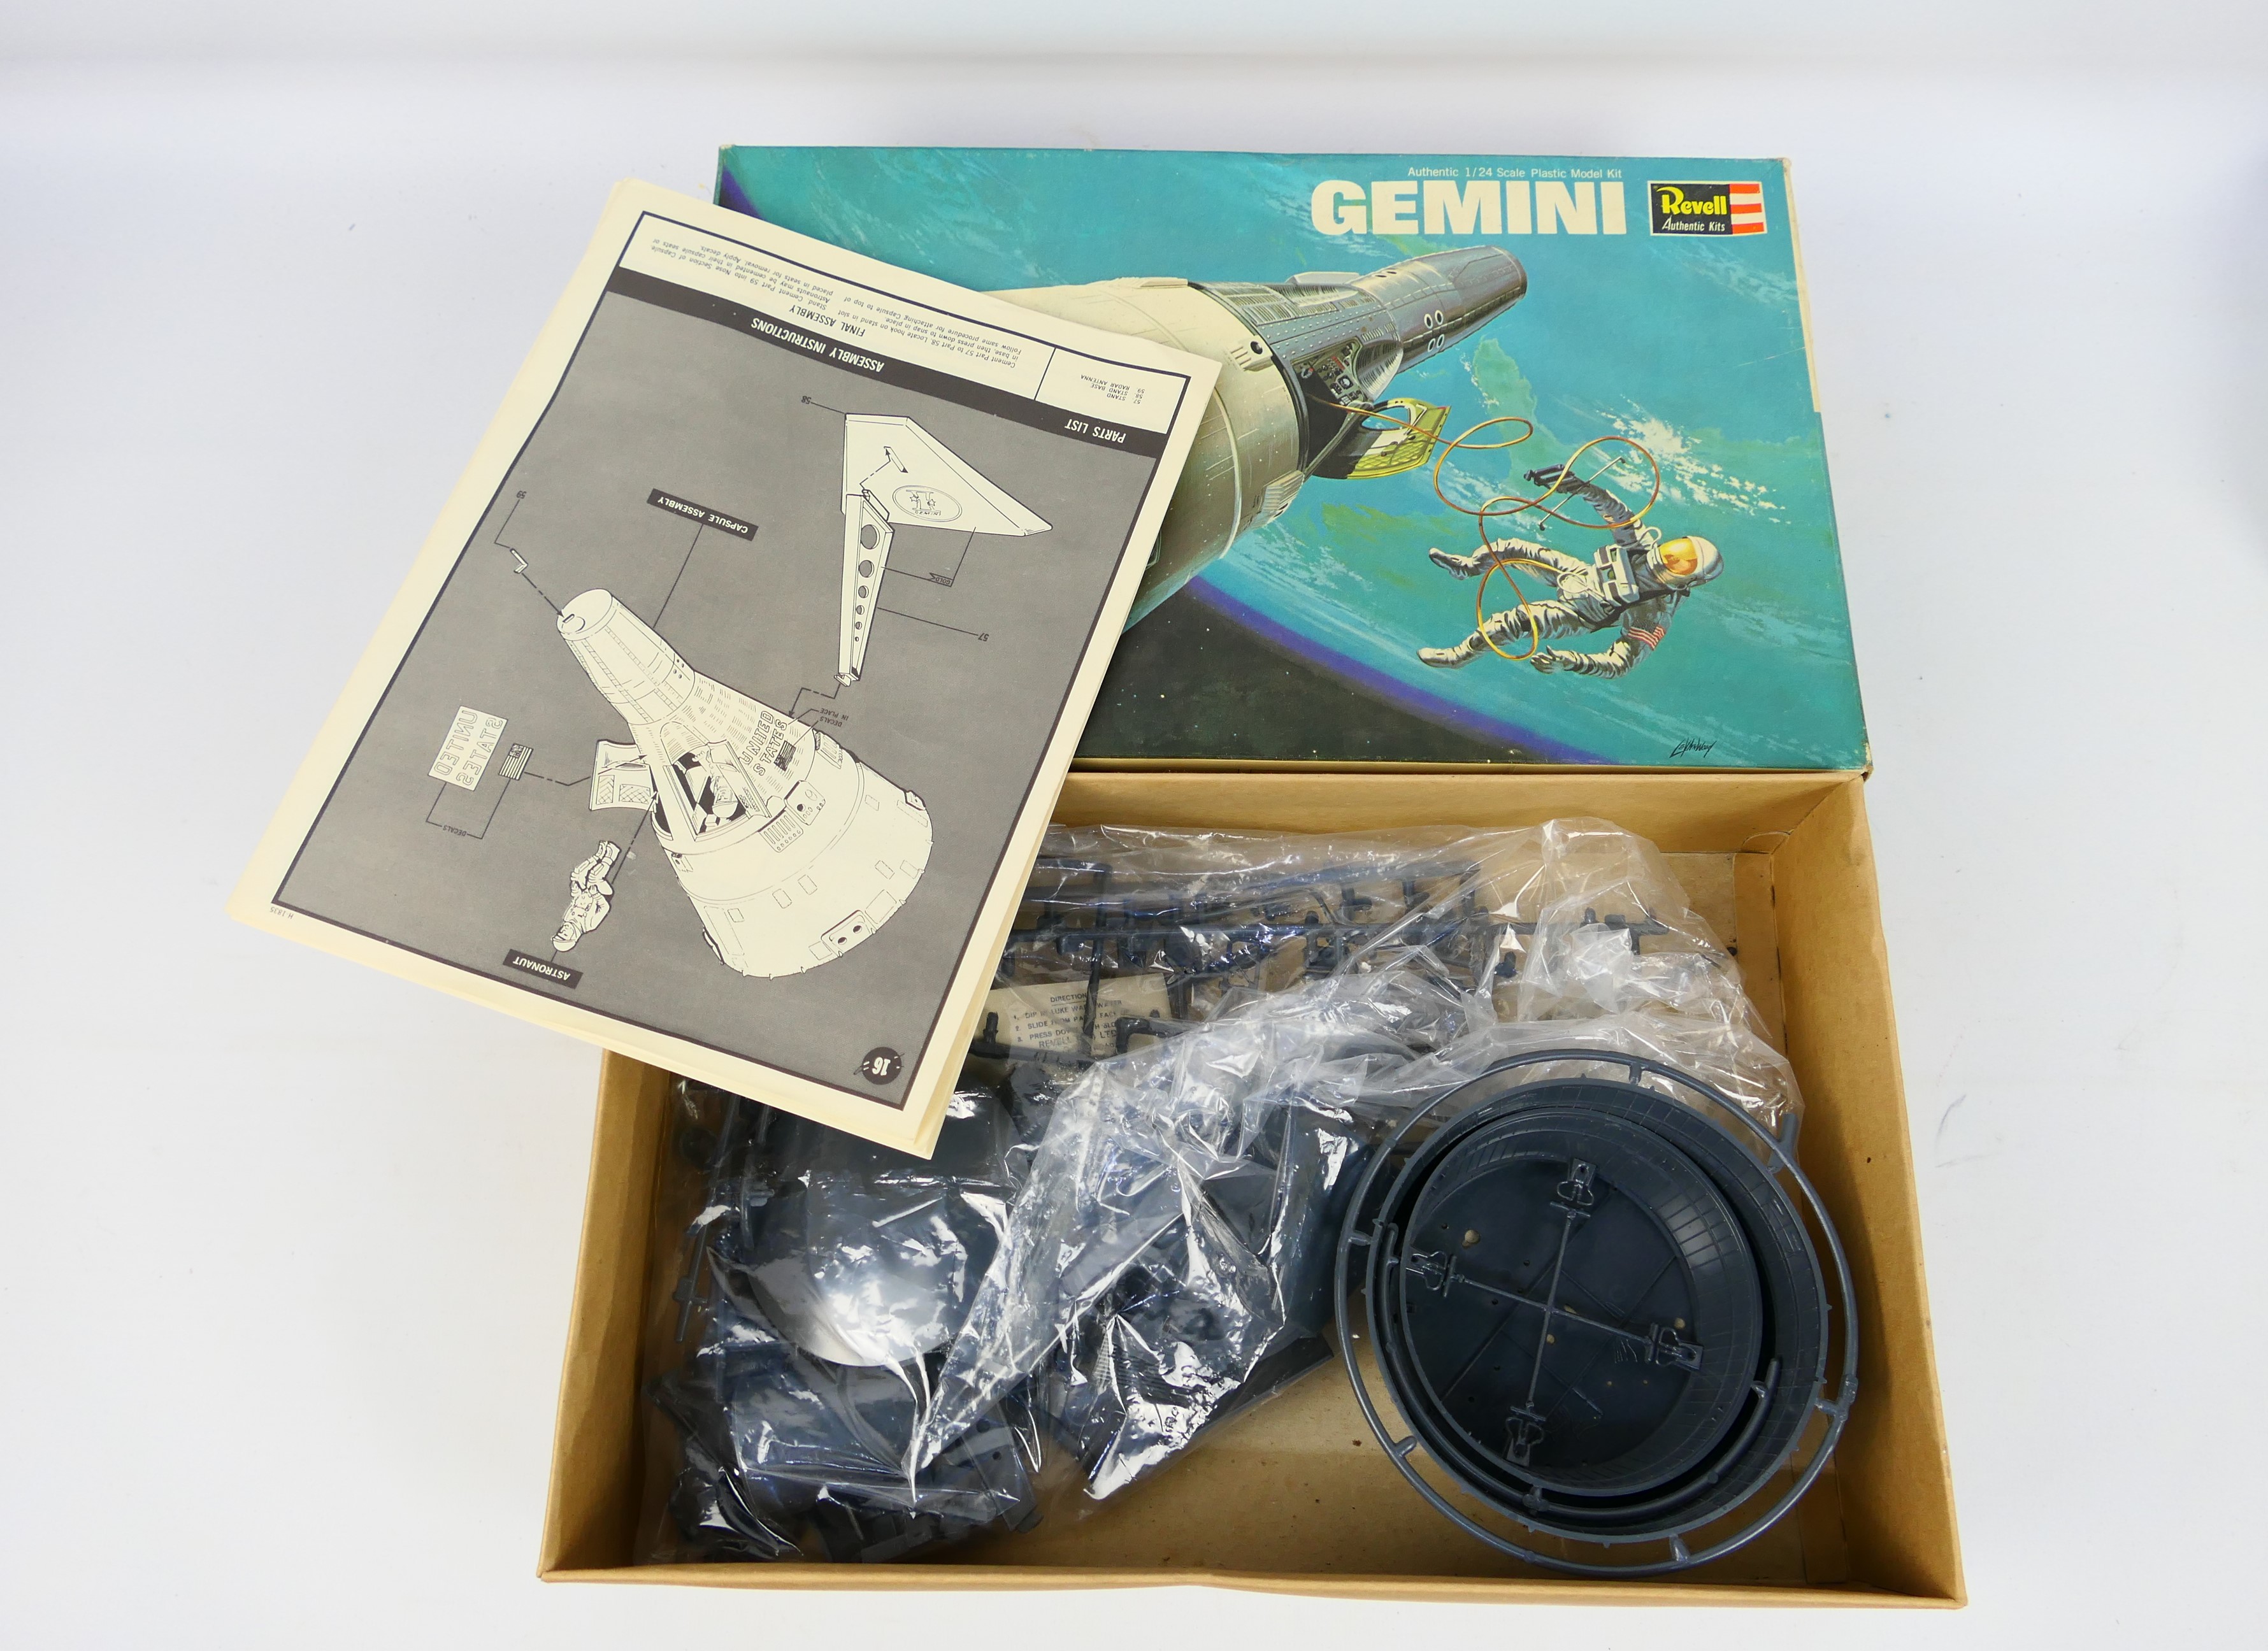 Airfix - Revell - Matchbox - 4 x vintage model kits including Gemini space capsule in 1:24 scale # - Image 8 of 12